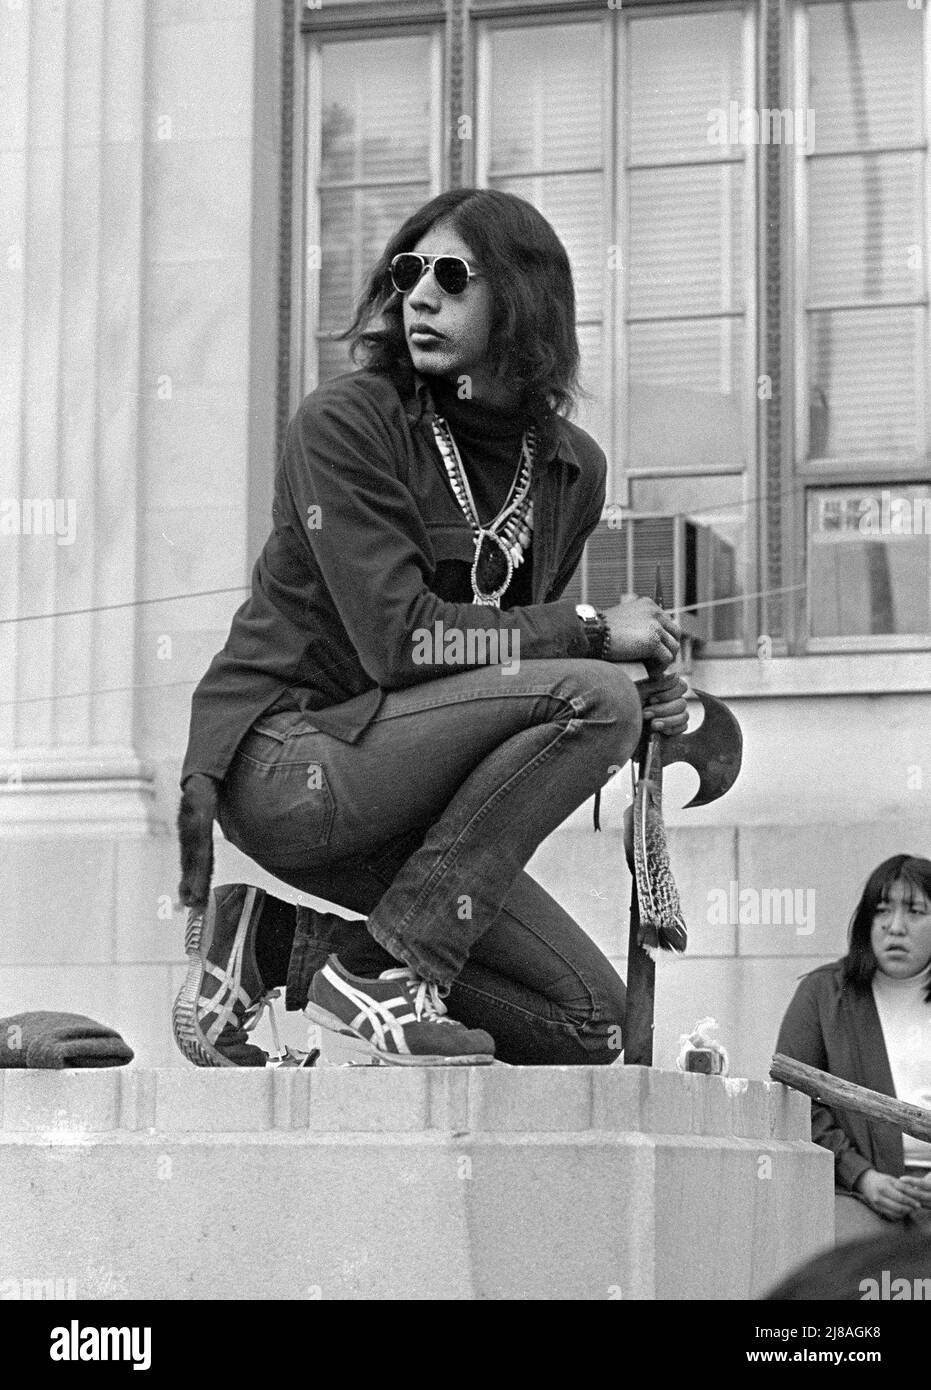 Washington, D.C. (07 Nov 1972: Grassroots movement American Indian Movement (AIM) arrived on Election Day ion Election Day thinking they would get publicity. Calling it the 'Trail of Broken Treaties' native Americans of all ages  from reservations across the country arrived to submit demands. Upset with reception led to them taking over and occupying the Bueeau of Indian Affairs headquaters next to Independence Mall. Fearing armed takeover they made taped windows, made weapons with scissors, or shields from chair seats. It all happened 50 years ago. They negotiated and walked out and got bused Stock Photo